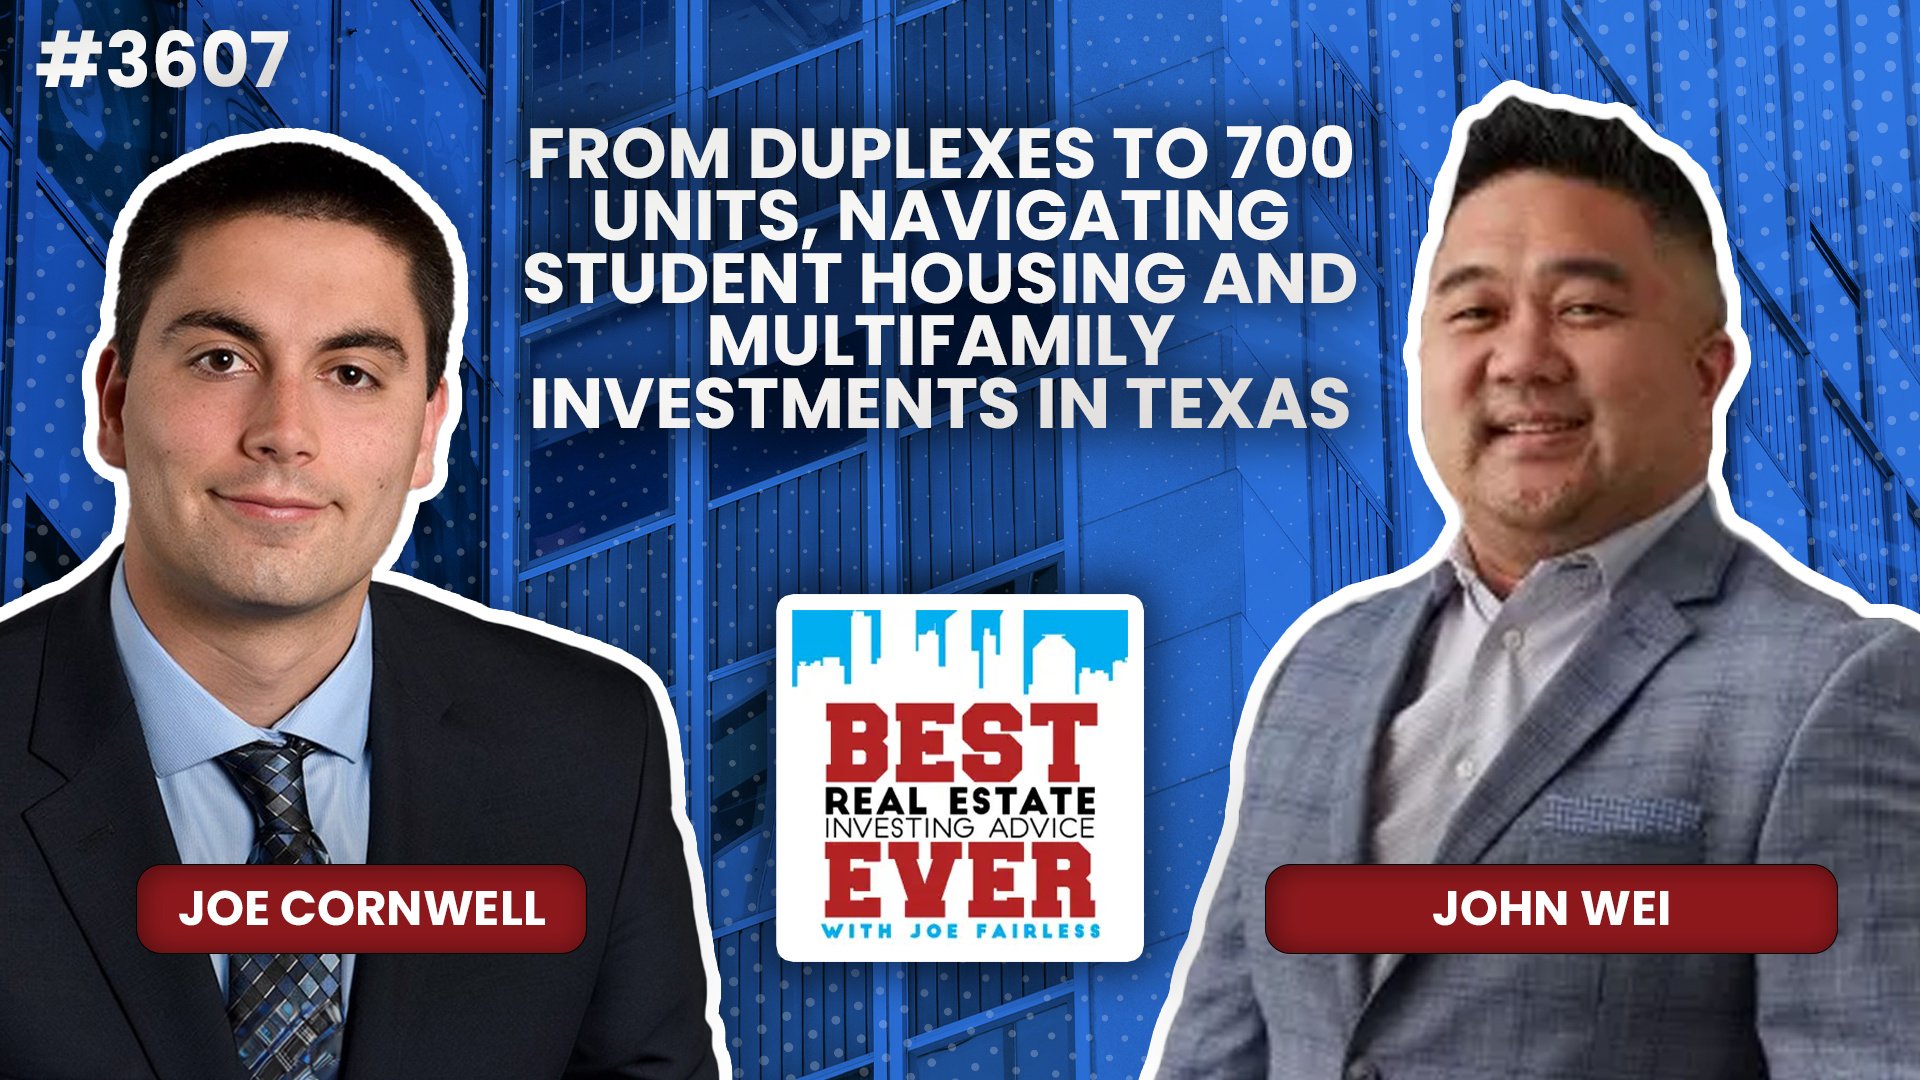 JF3607: From Duplexes to 700 Units, Navigating Student Housing and Multifamily Investments in Texas ft. John Wei